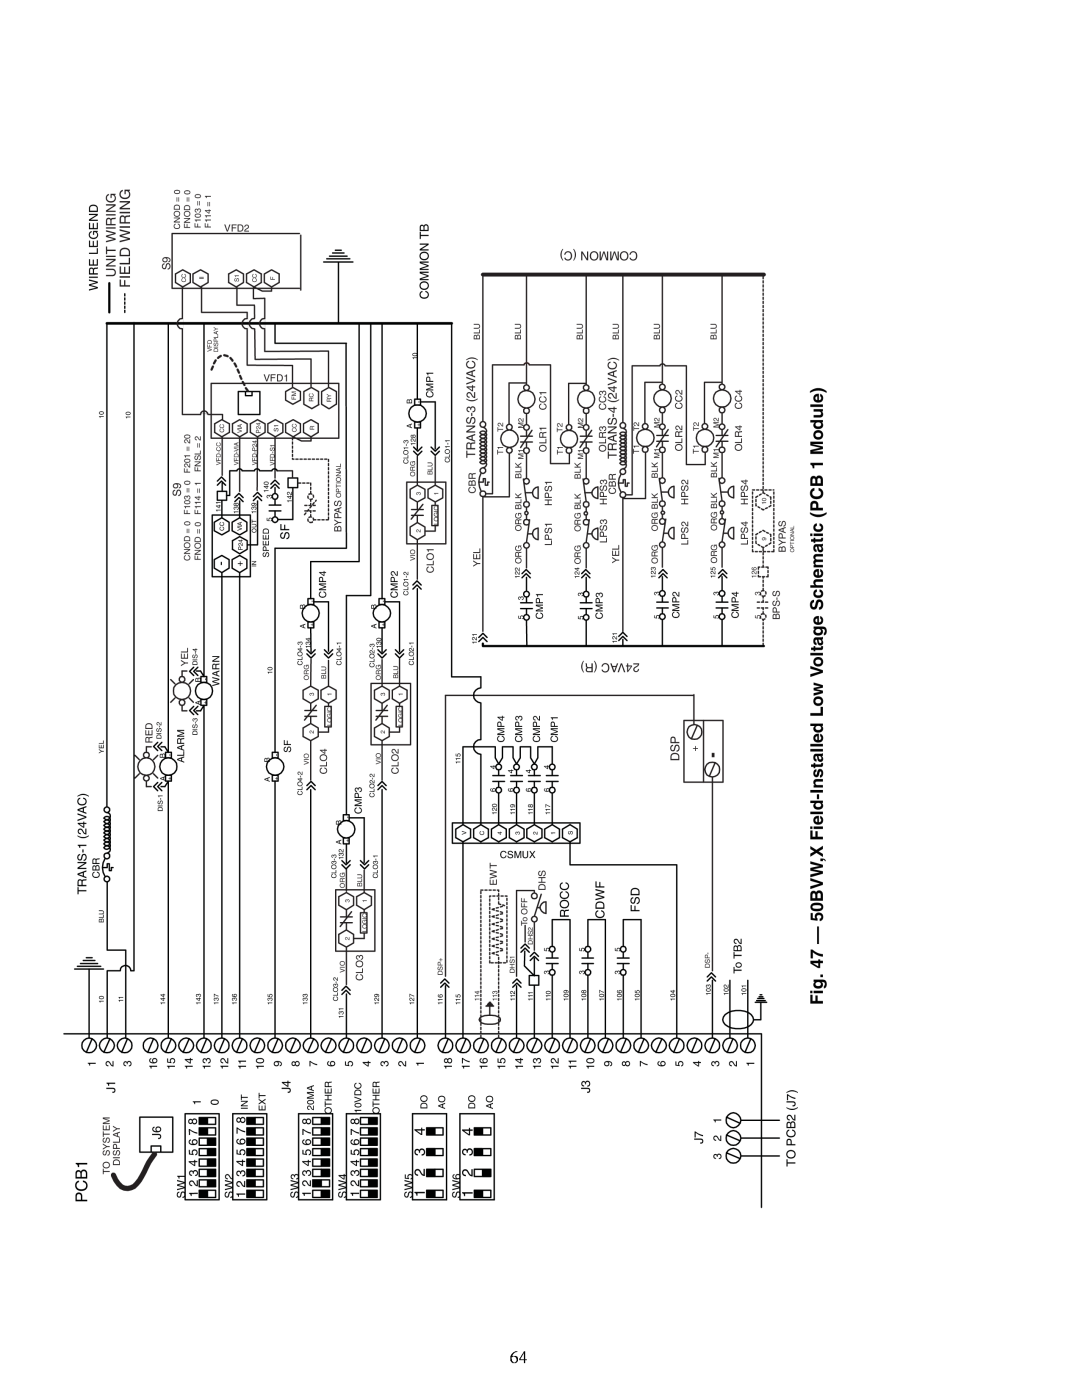 Carrier 50BV020-064 specifications PCB1, Field Wiring 